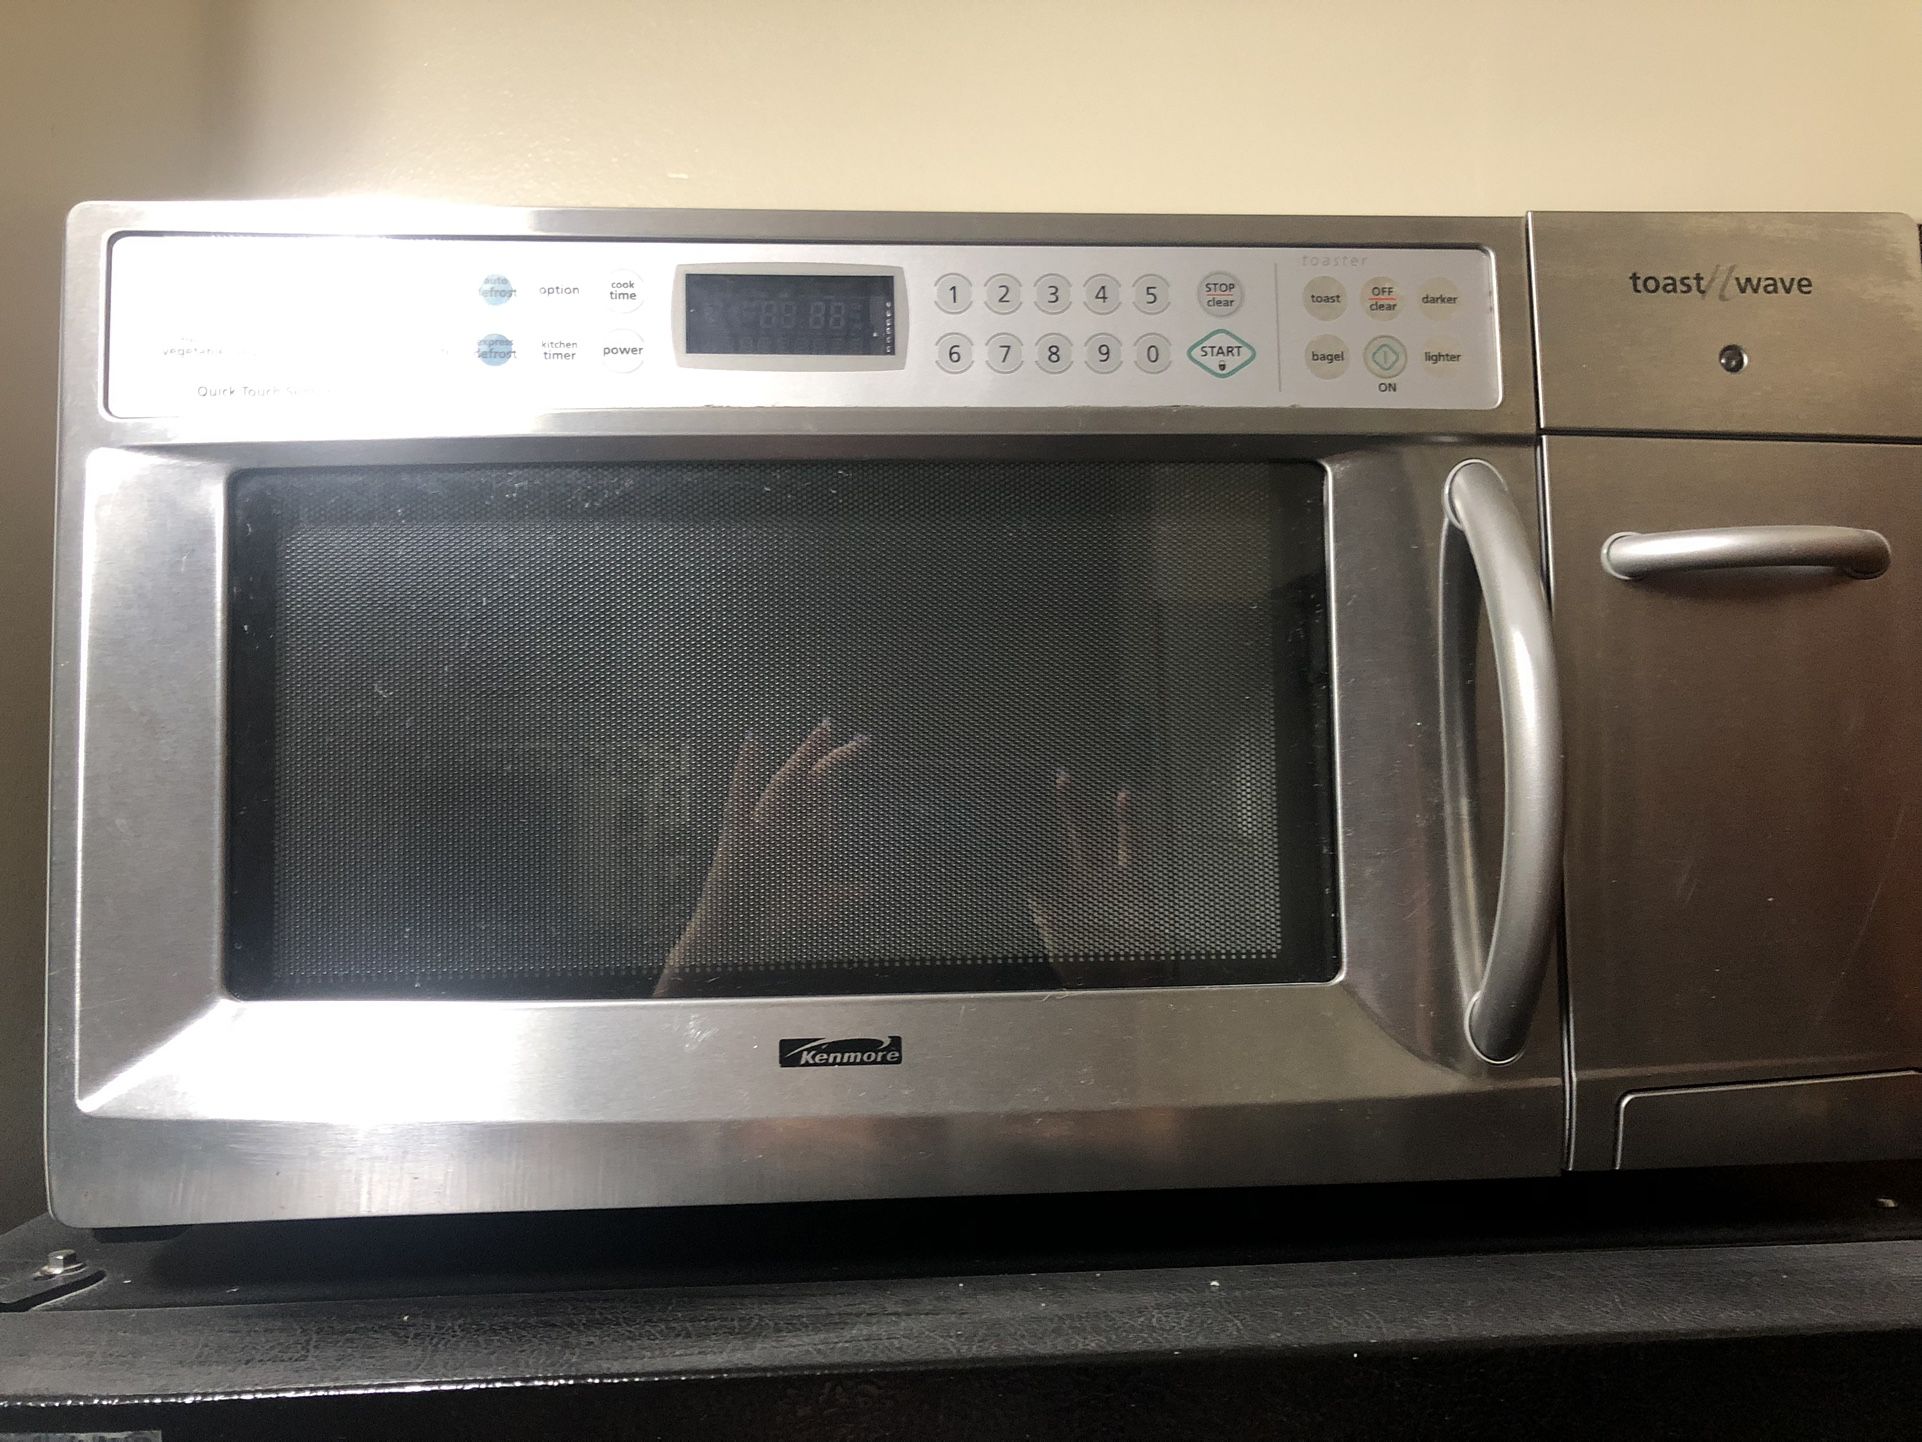 Microwave Oven/Toaster